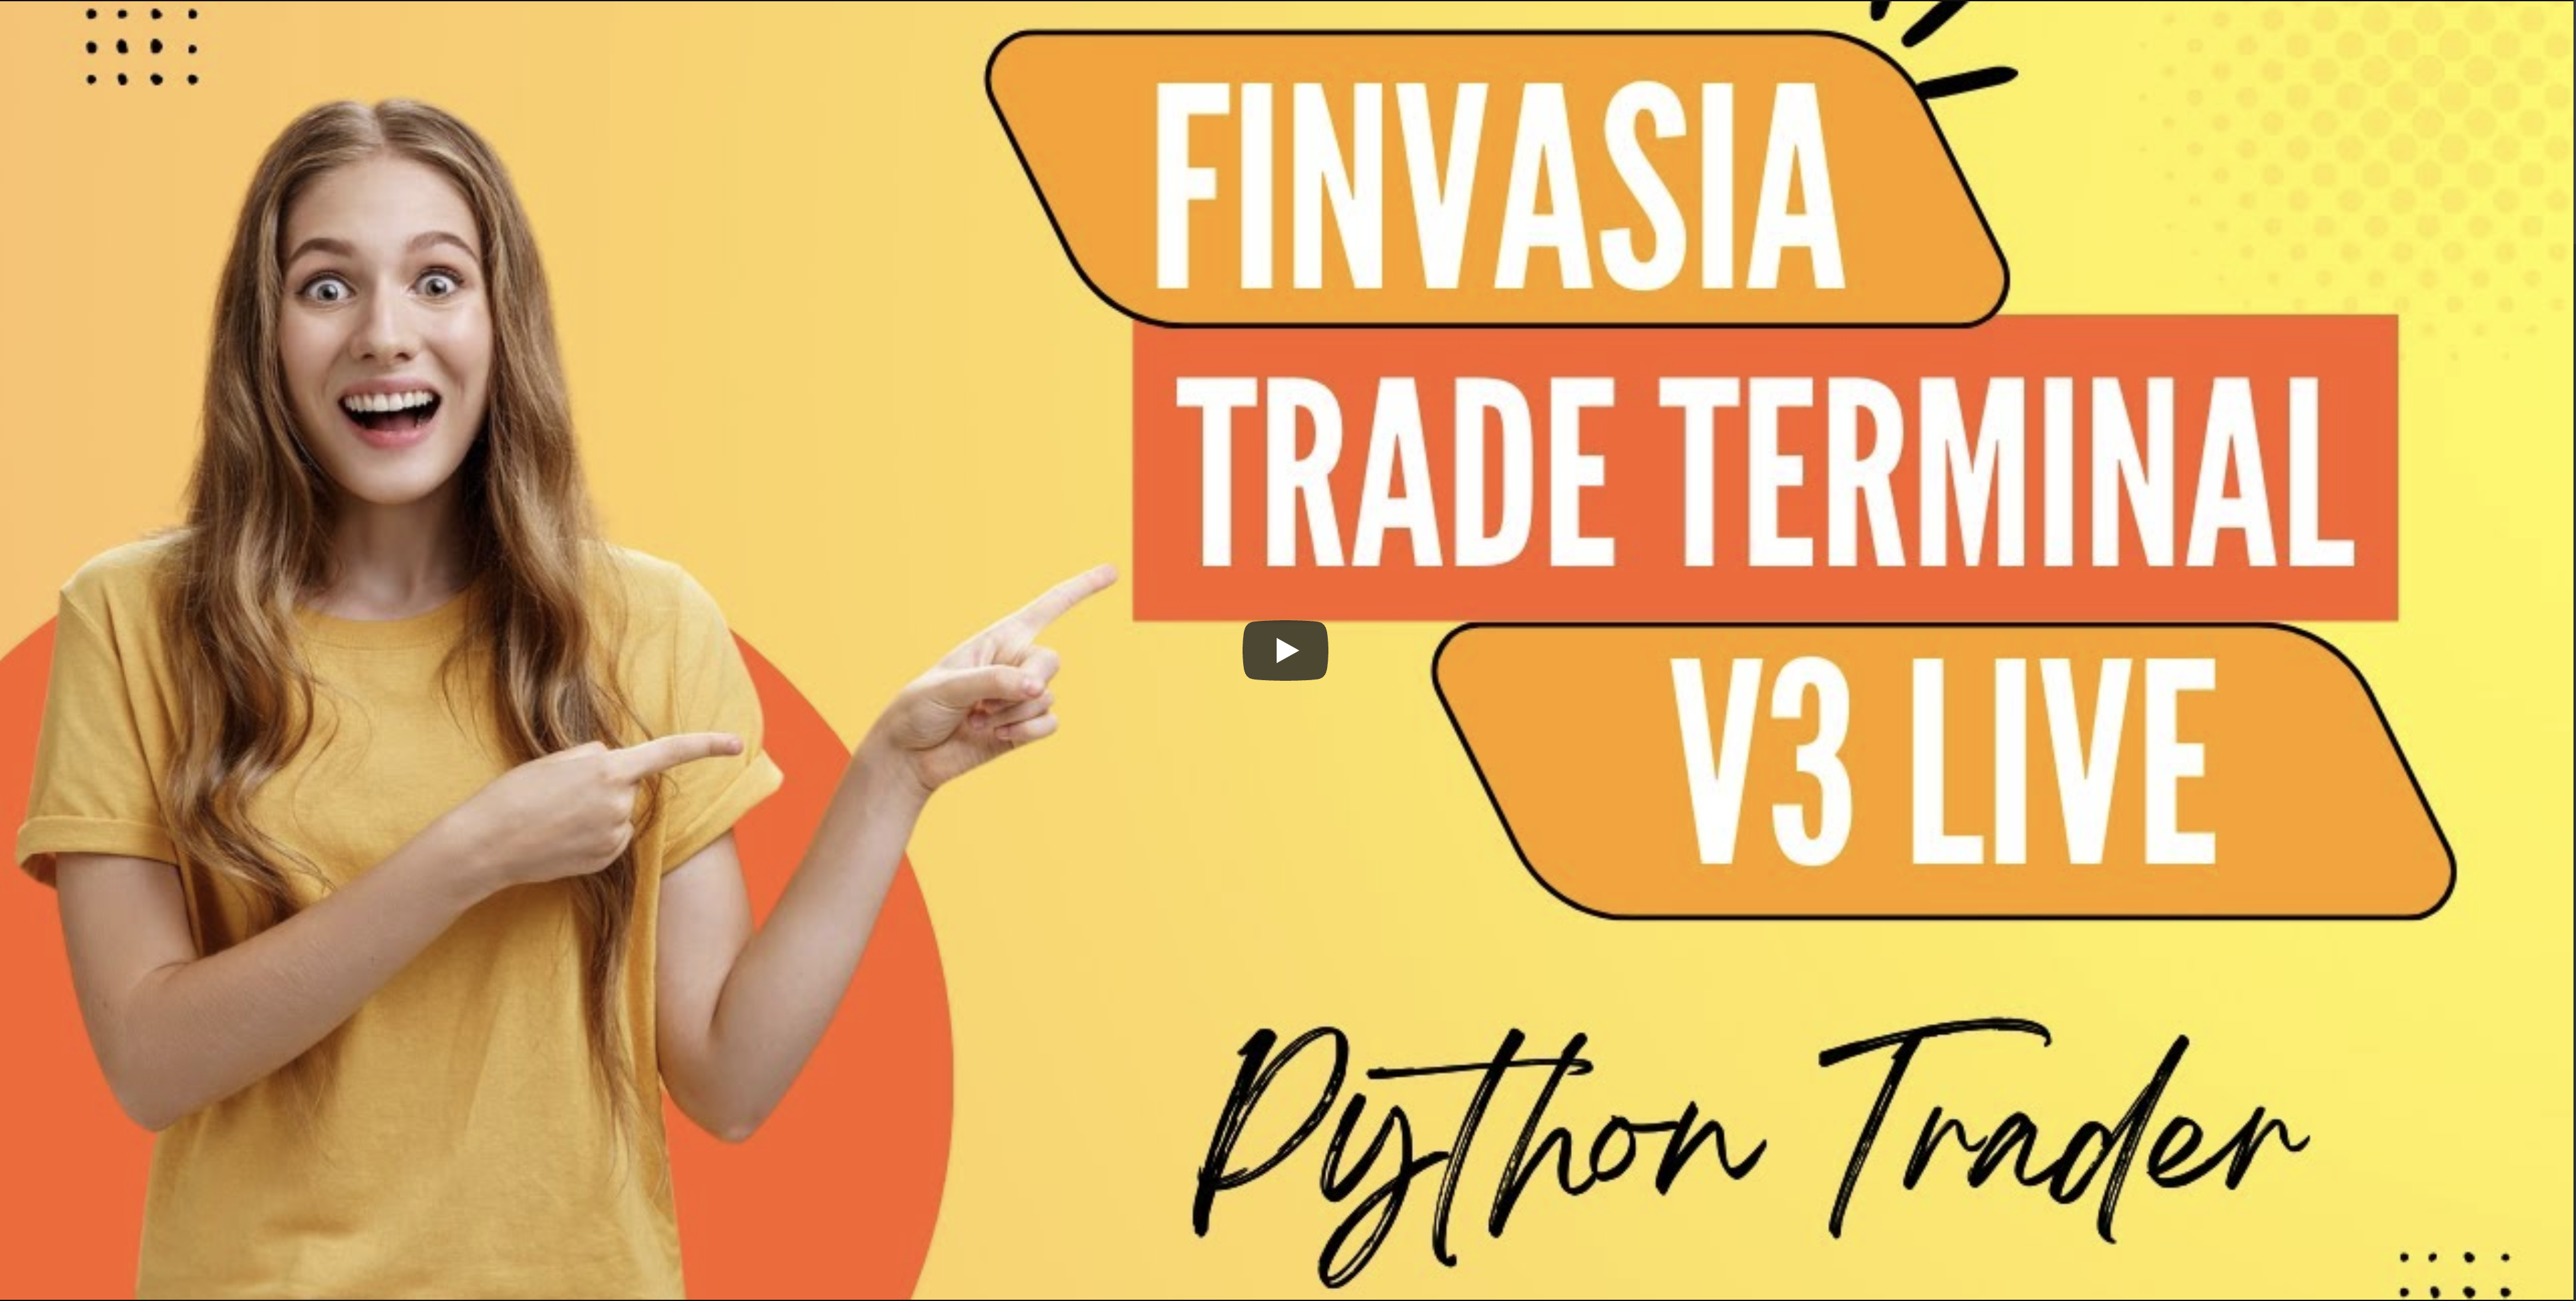 Watch The Youtube Video For More Details On How To Install & Use Finvasia Excel Trade Terminal V3